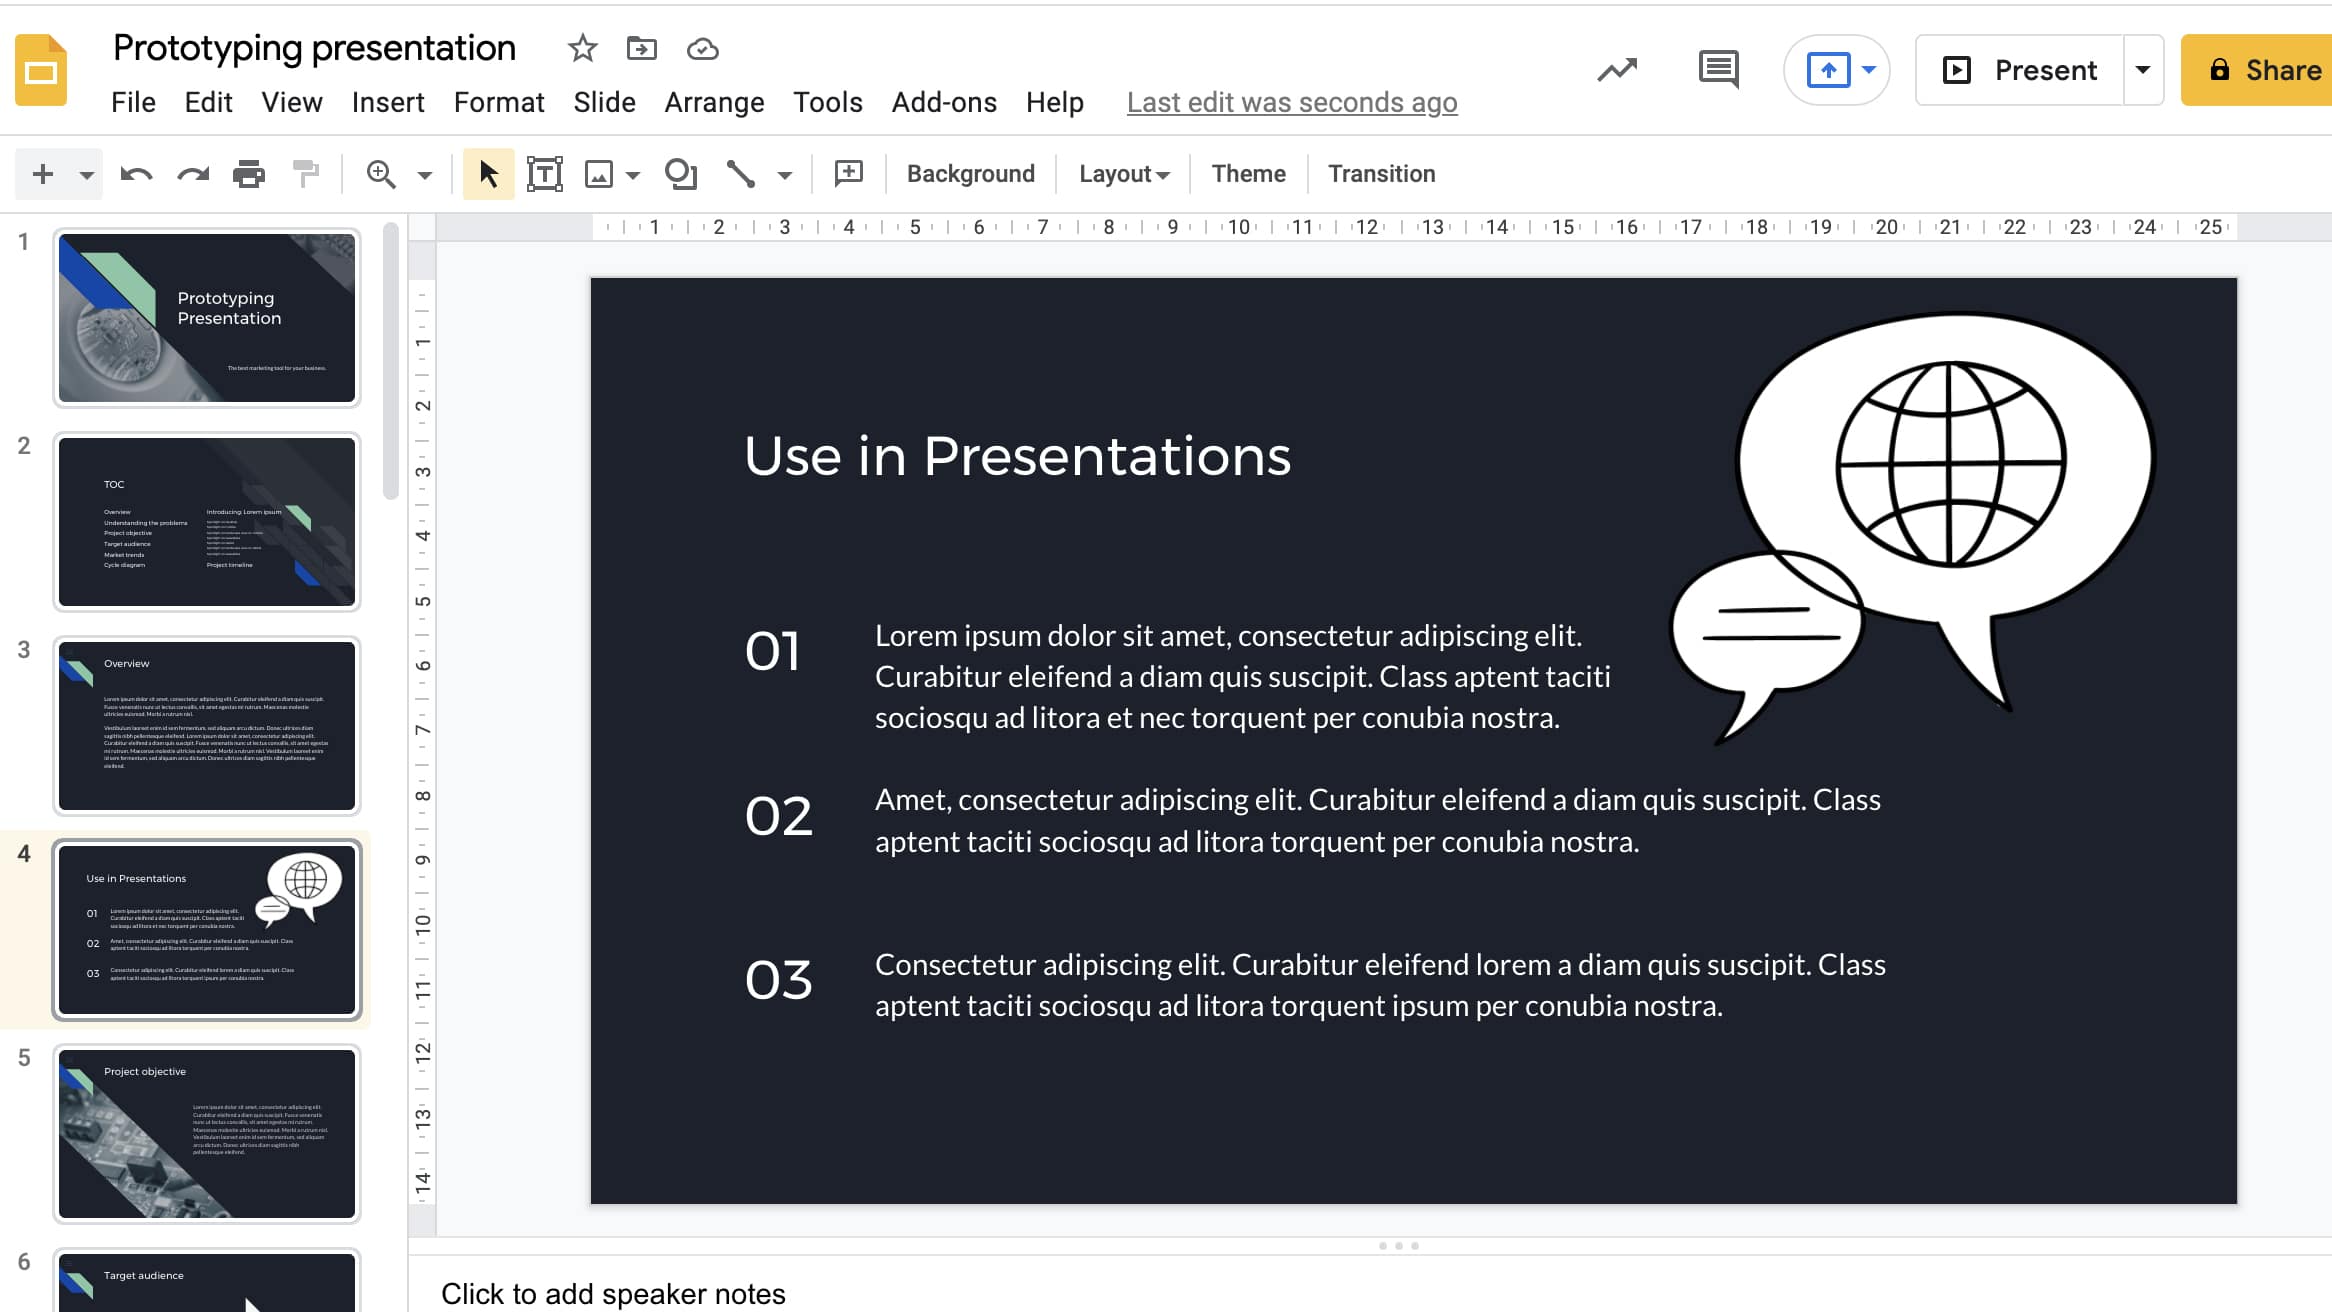 Hand drawn icons give presentations a more human feel